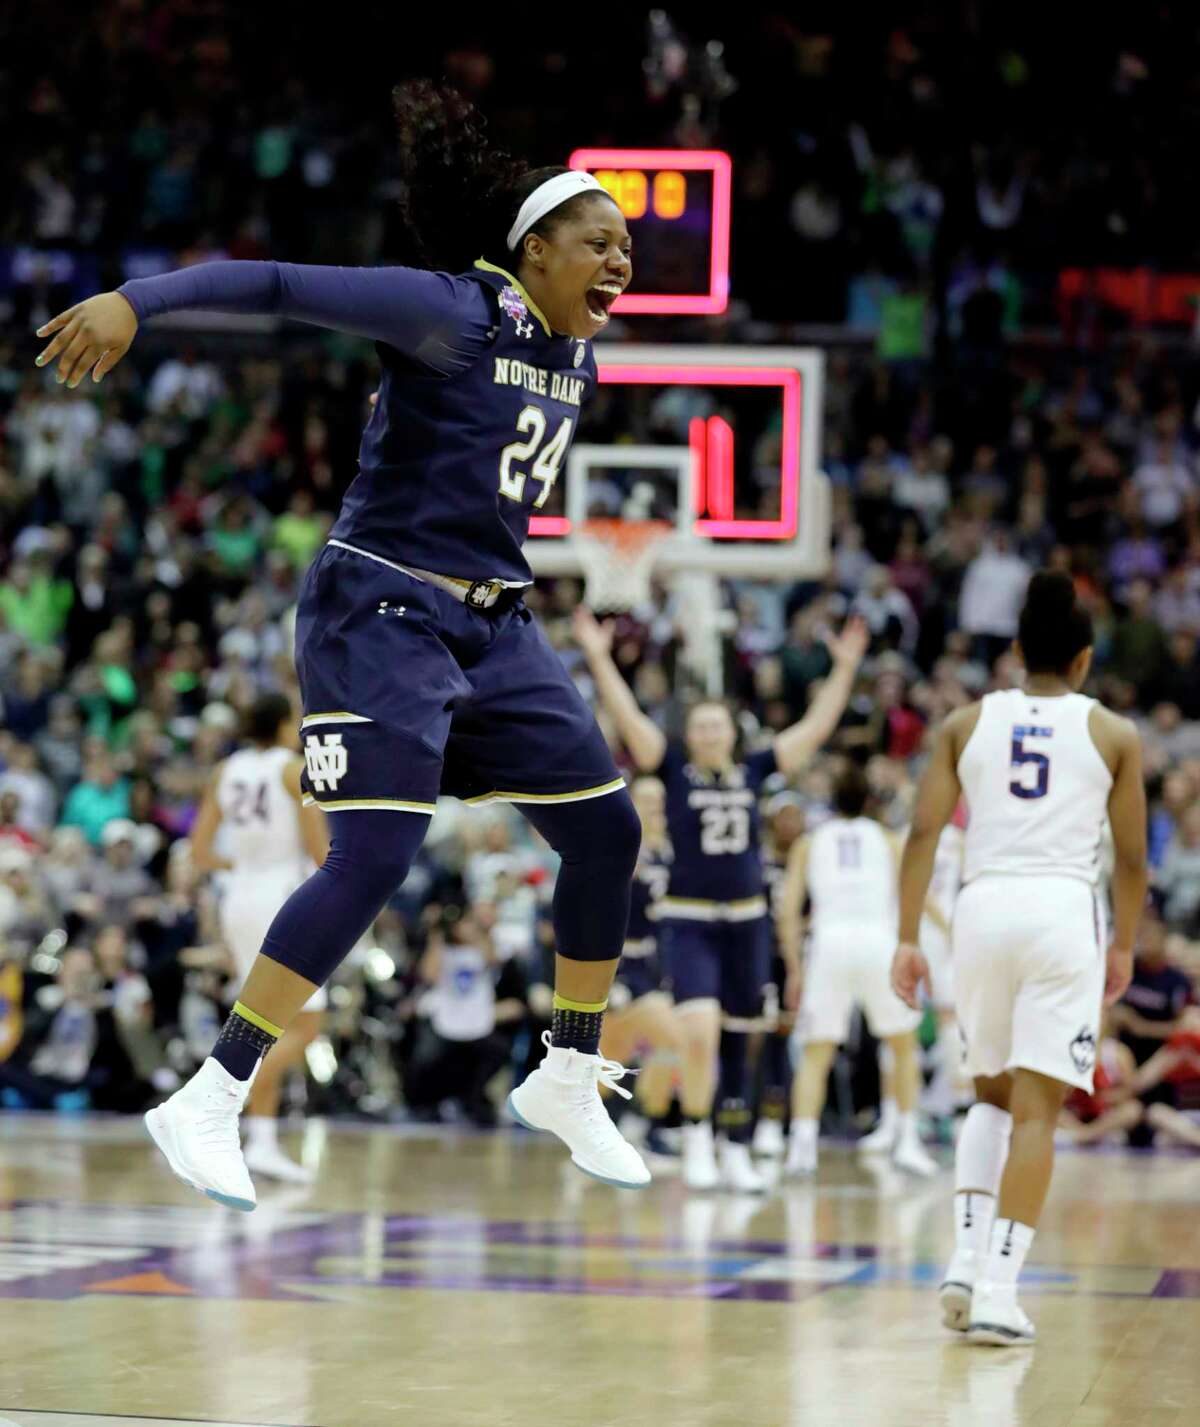 Notre Dame's Arike Ogunbowale (24) celebrates as Connecticut's Crystal Dangerfield (5) walks away as time expires in overtime in the semifinals of the women's NCAA Final Four college basketball tournament, Friday, March 30, 2018, in Columbus, Ohio. Notre Dame won 91-89. (AP Photo/Tony Dejak)